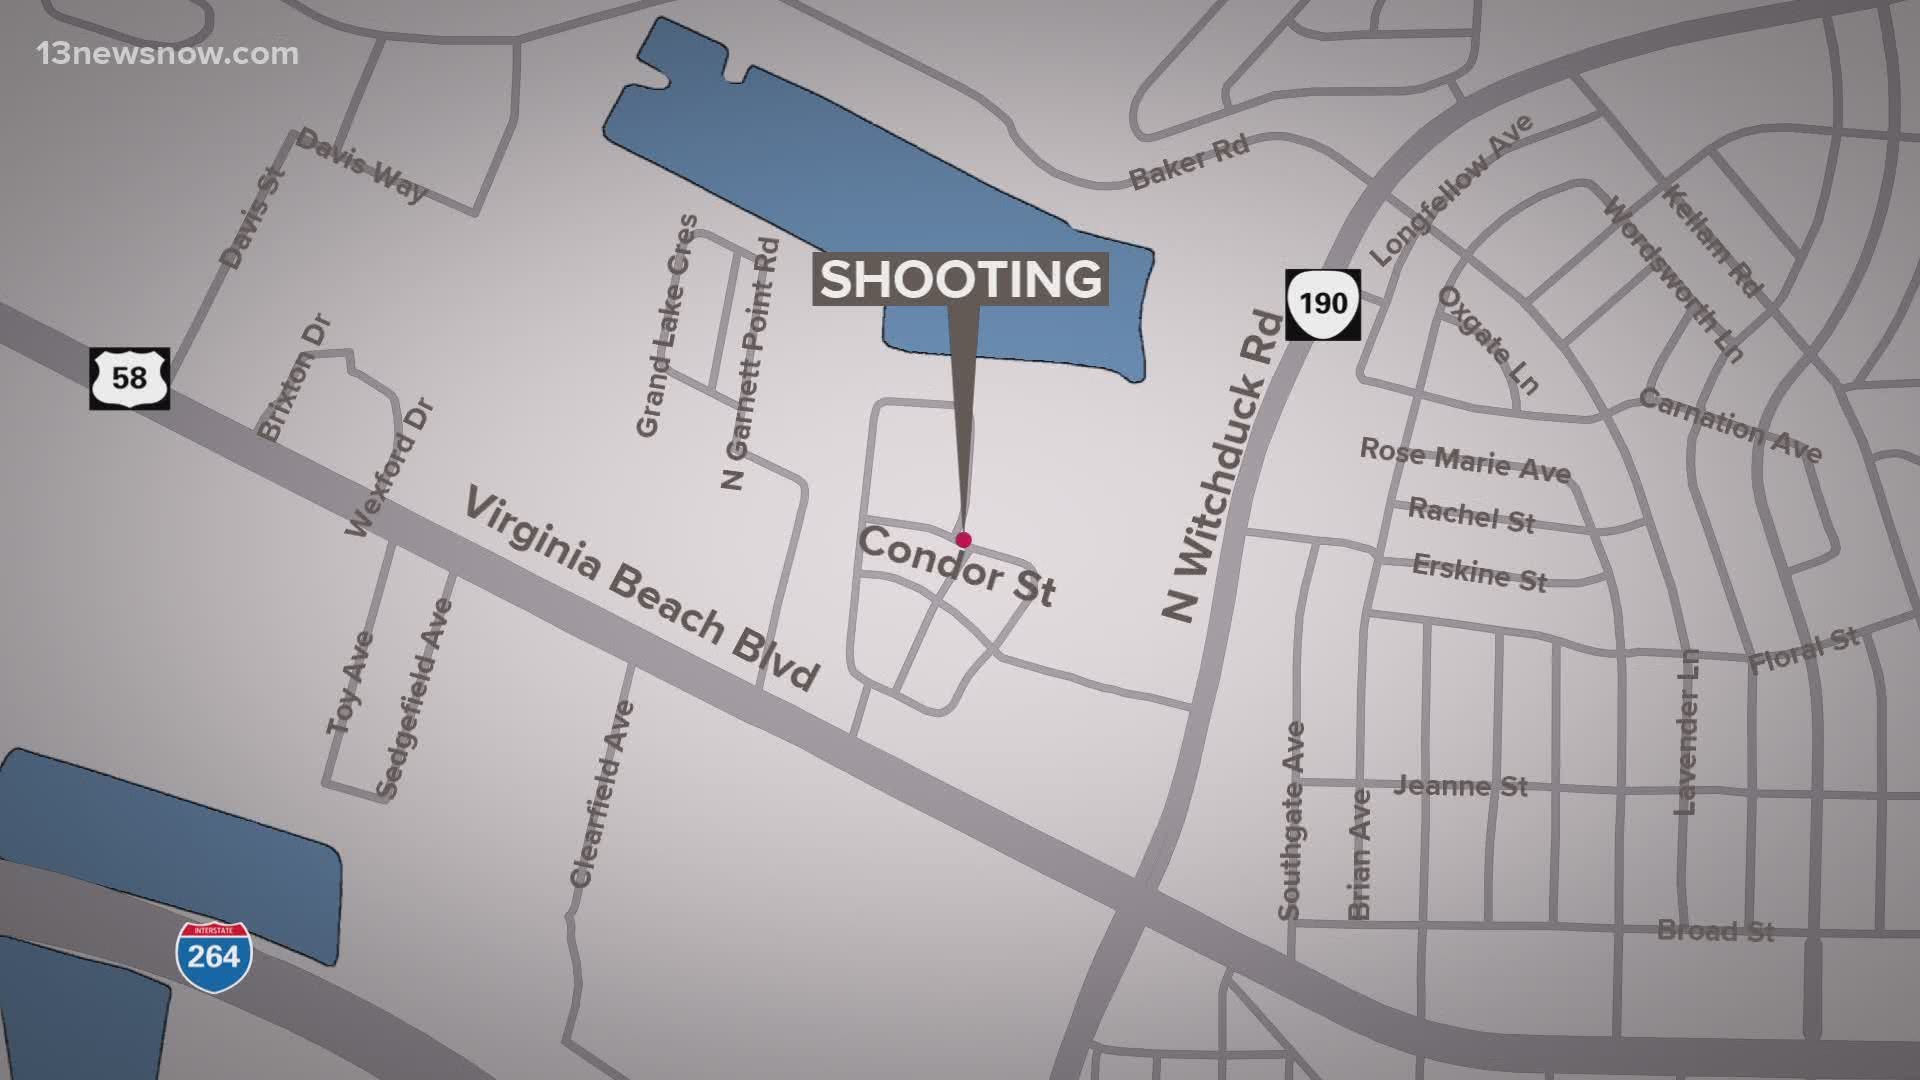 Police said a dispute led to the first shooting. They're trying to figure out more about the second shooting, which left a man with life-threatening injuries.